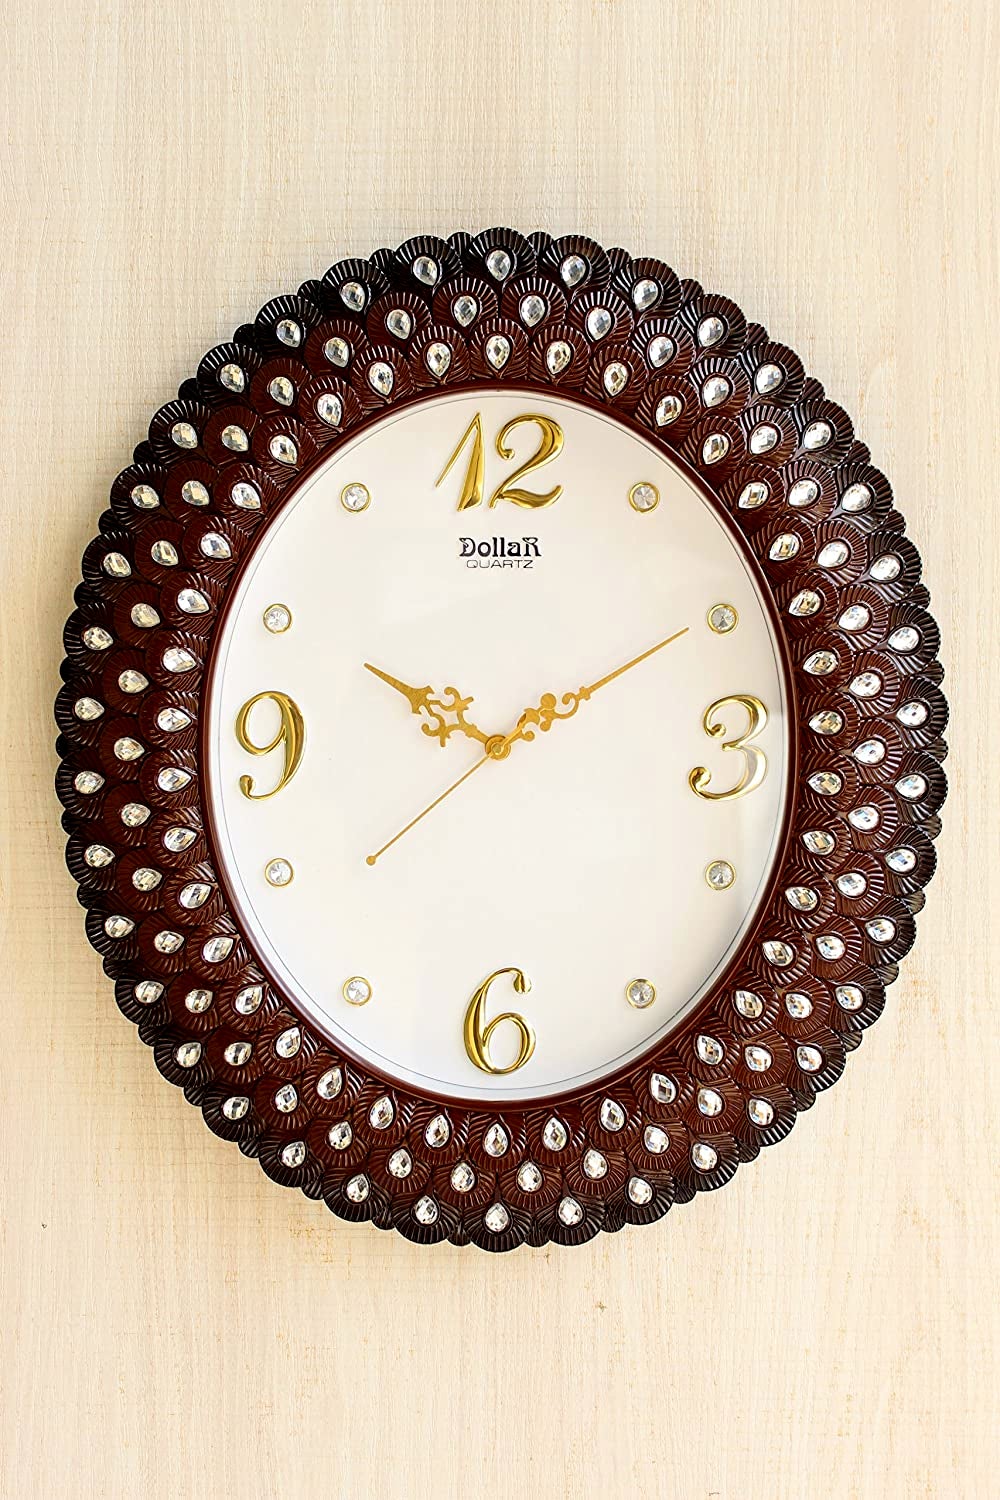 FunkyTradition Royal Pearl Diamond Cherry Brown Wall Clock, Wall Watch, Wall Decor for Home Office Decor and Gifts 47 cm Tall